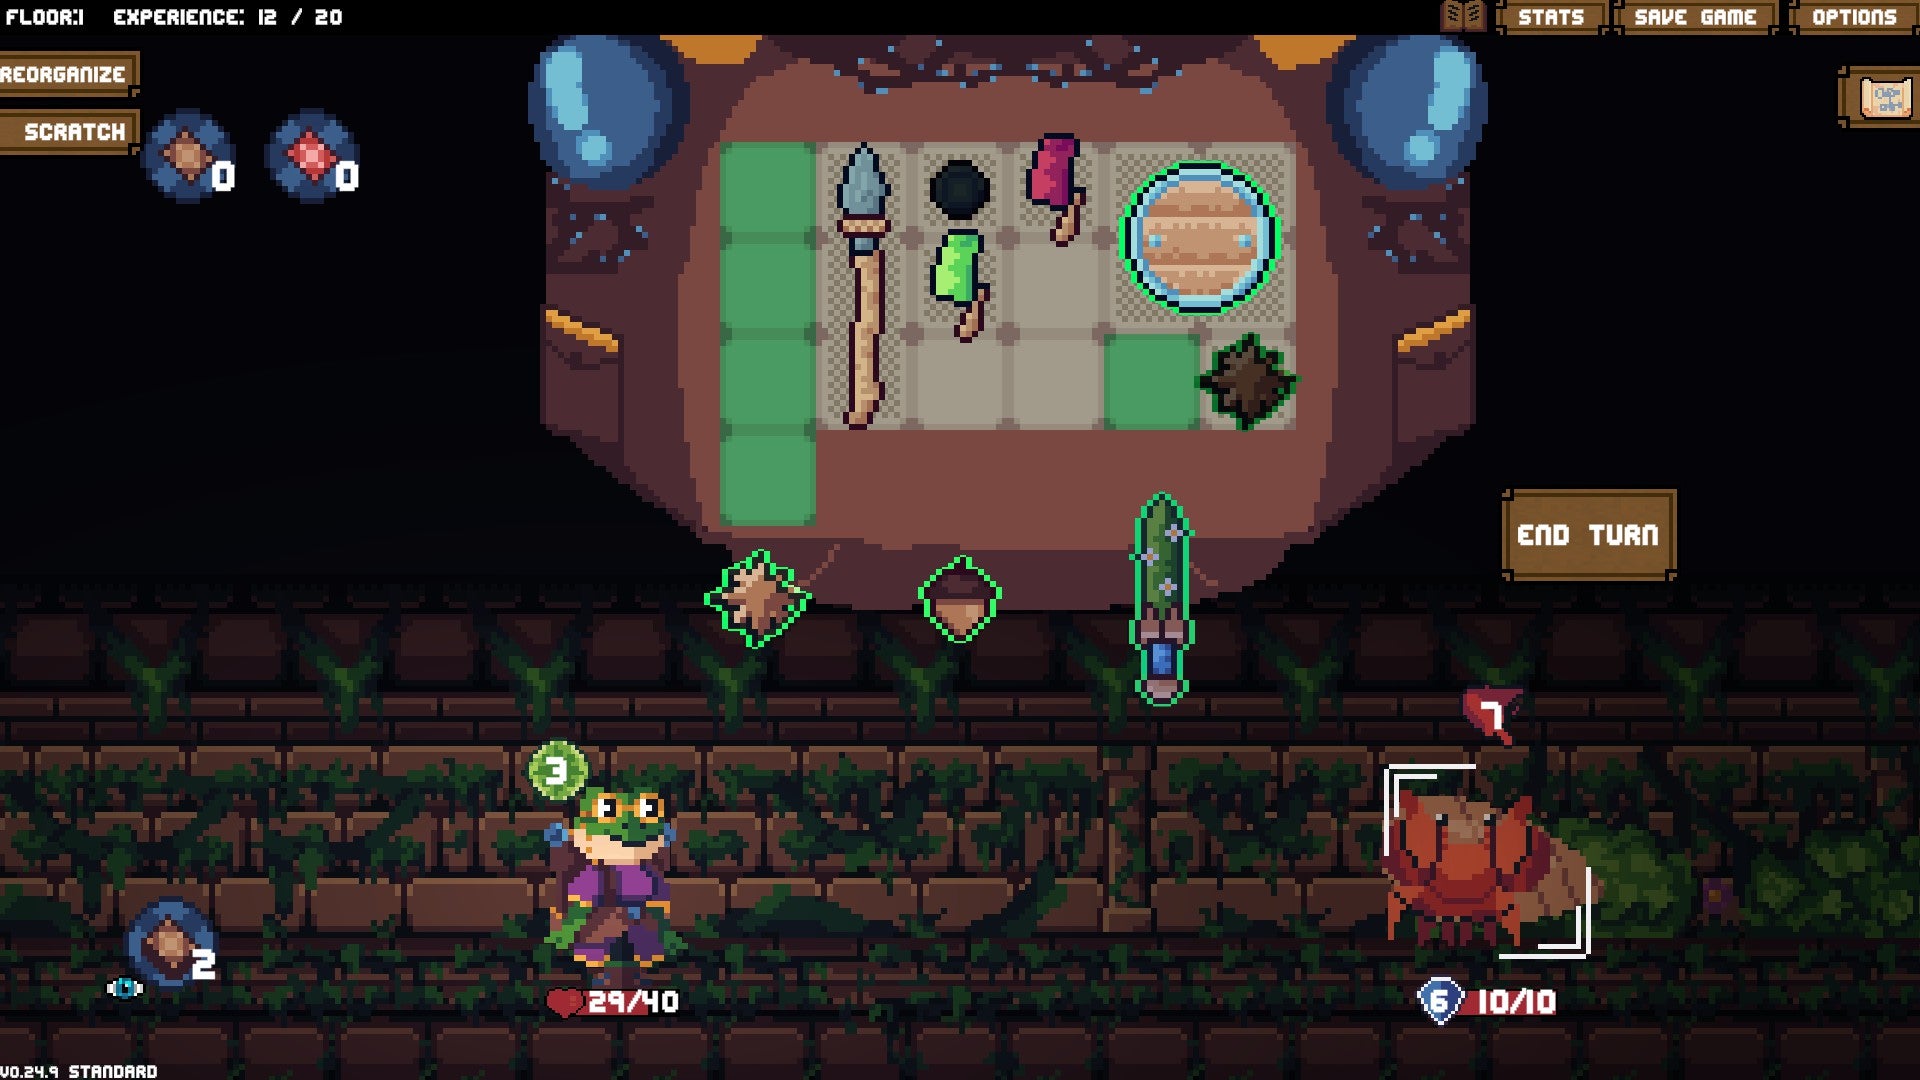 A small frog character stands underneath a huge open backpack that's filling half the screen, organised into tiles, and there are a variety of weapons and items filling those tiles.